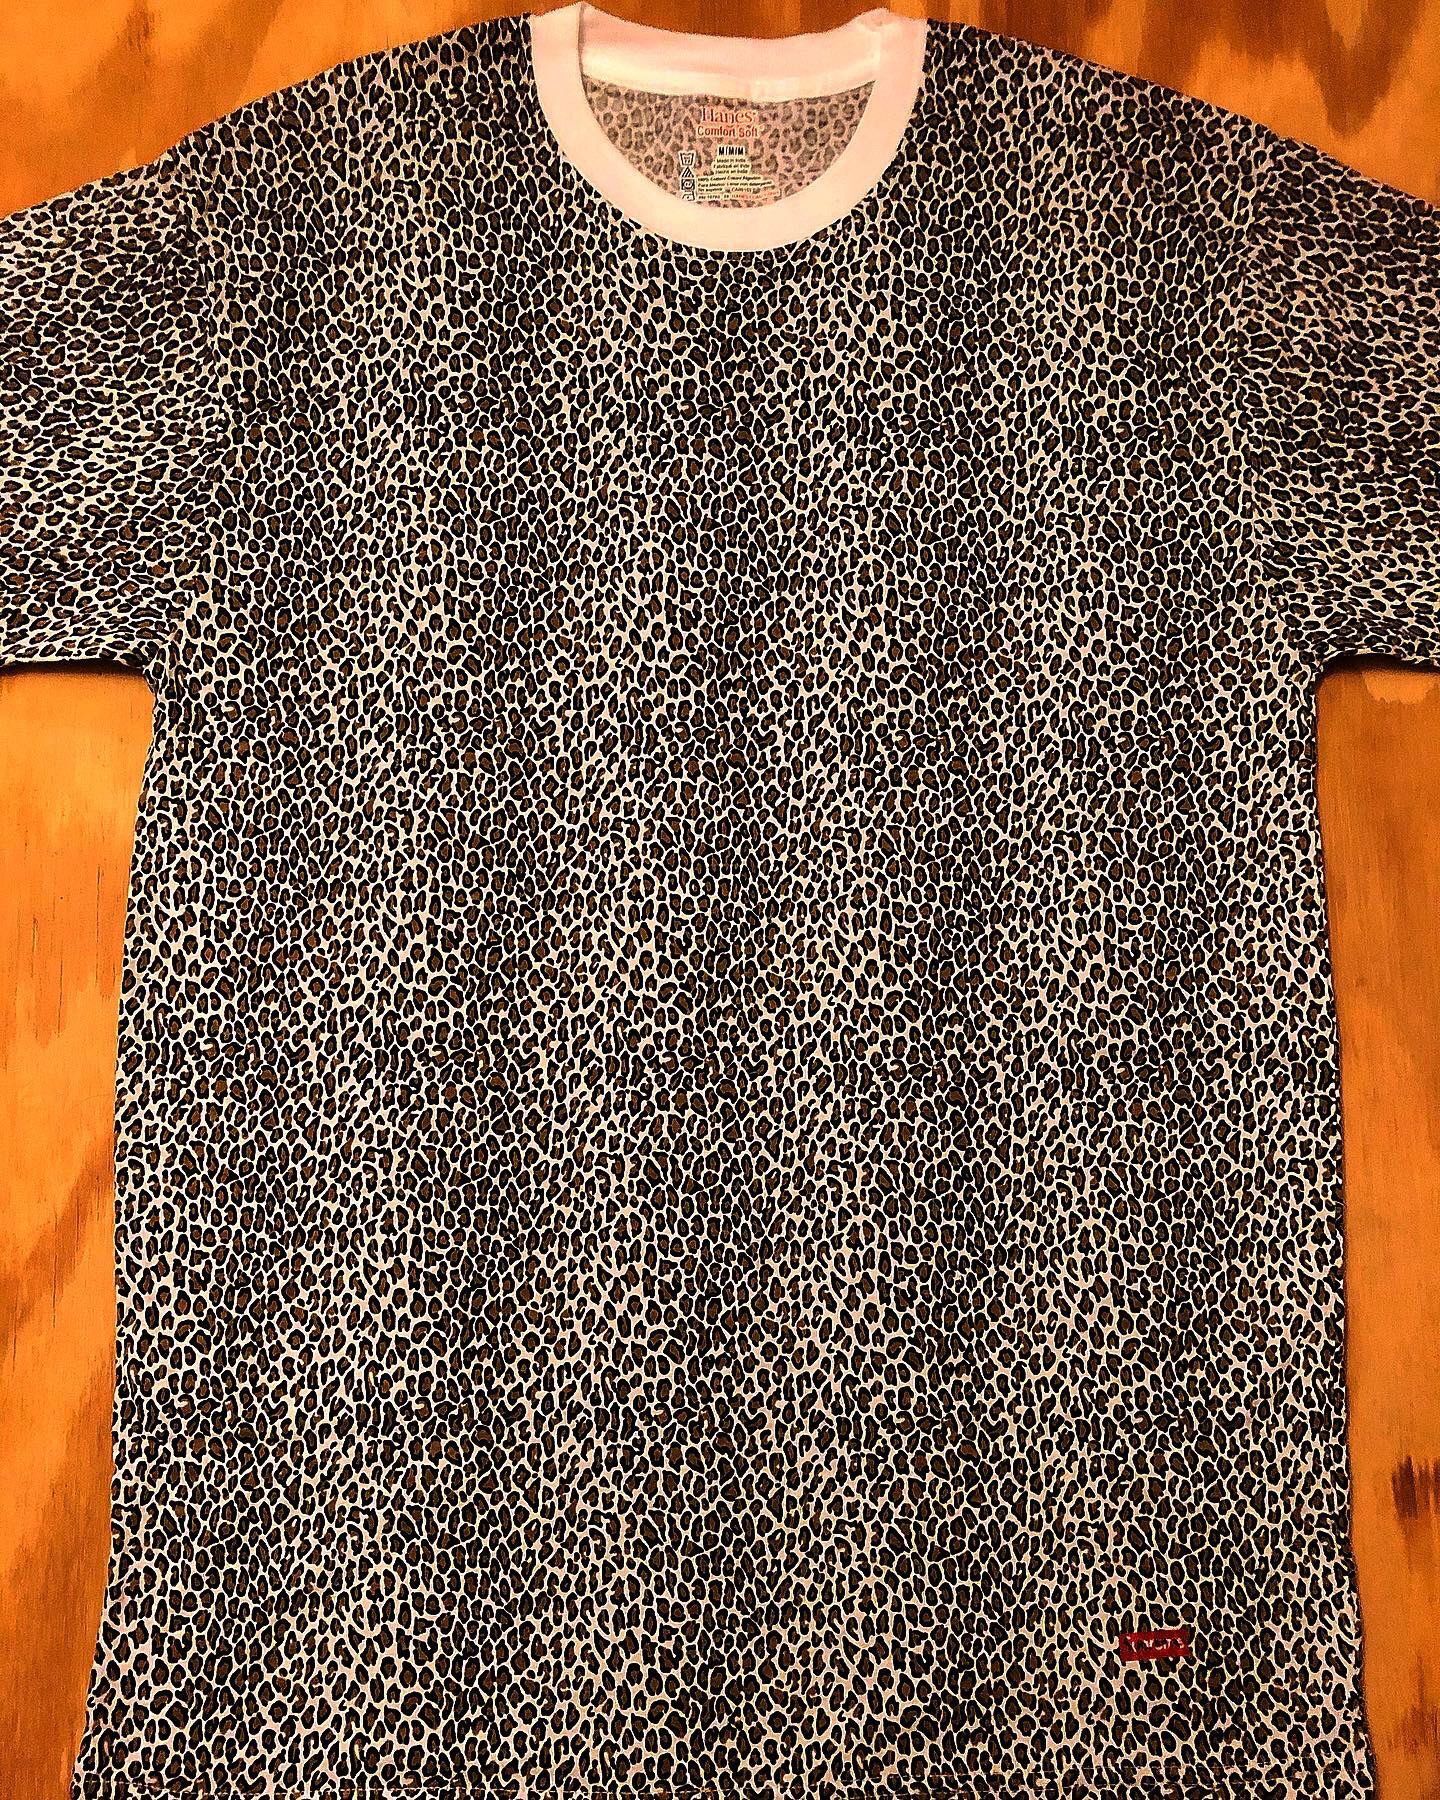 [for sale] Supreme/Hanes Leopard Tagless T-Shirt | Size: Medium | Condition: Brand new | $60